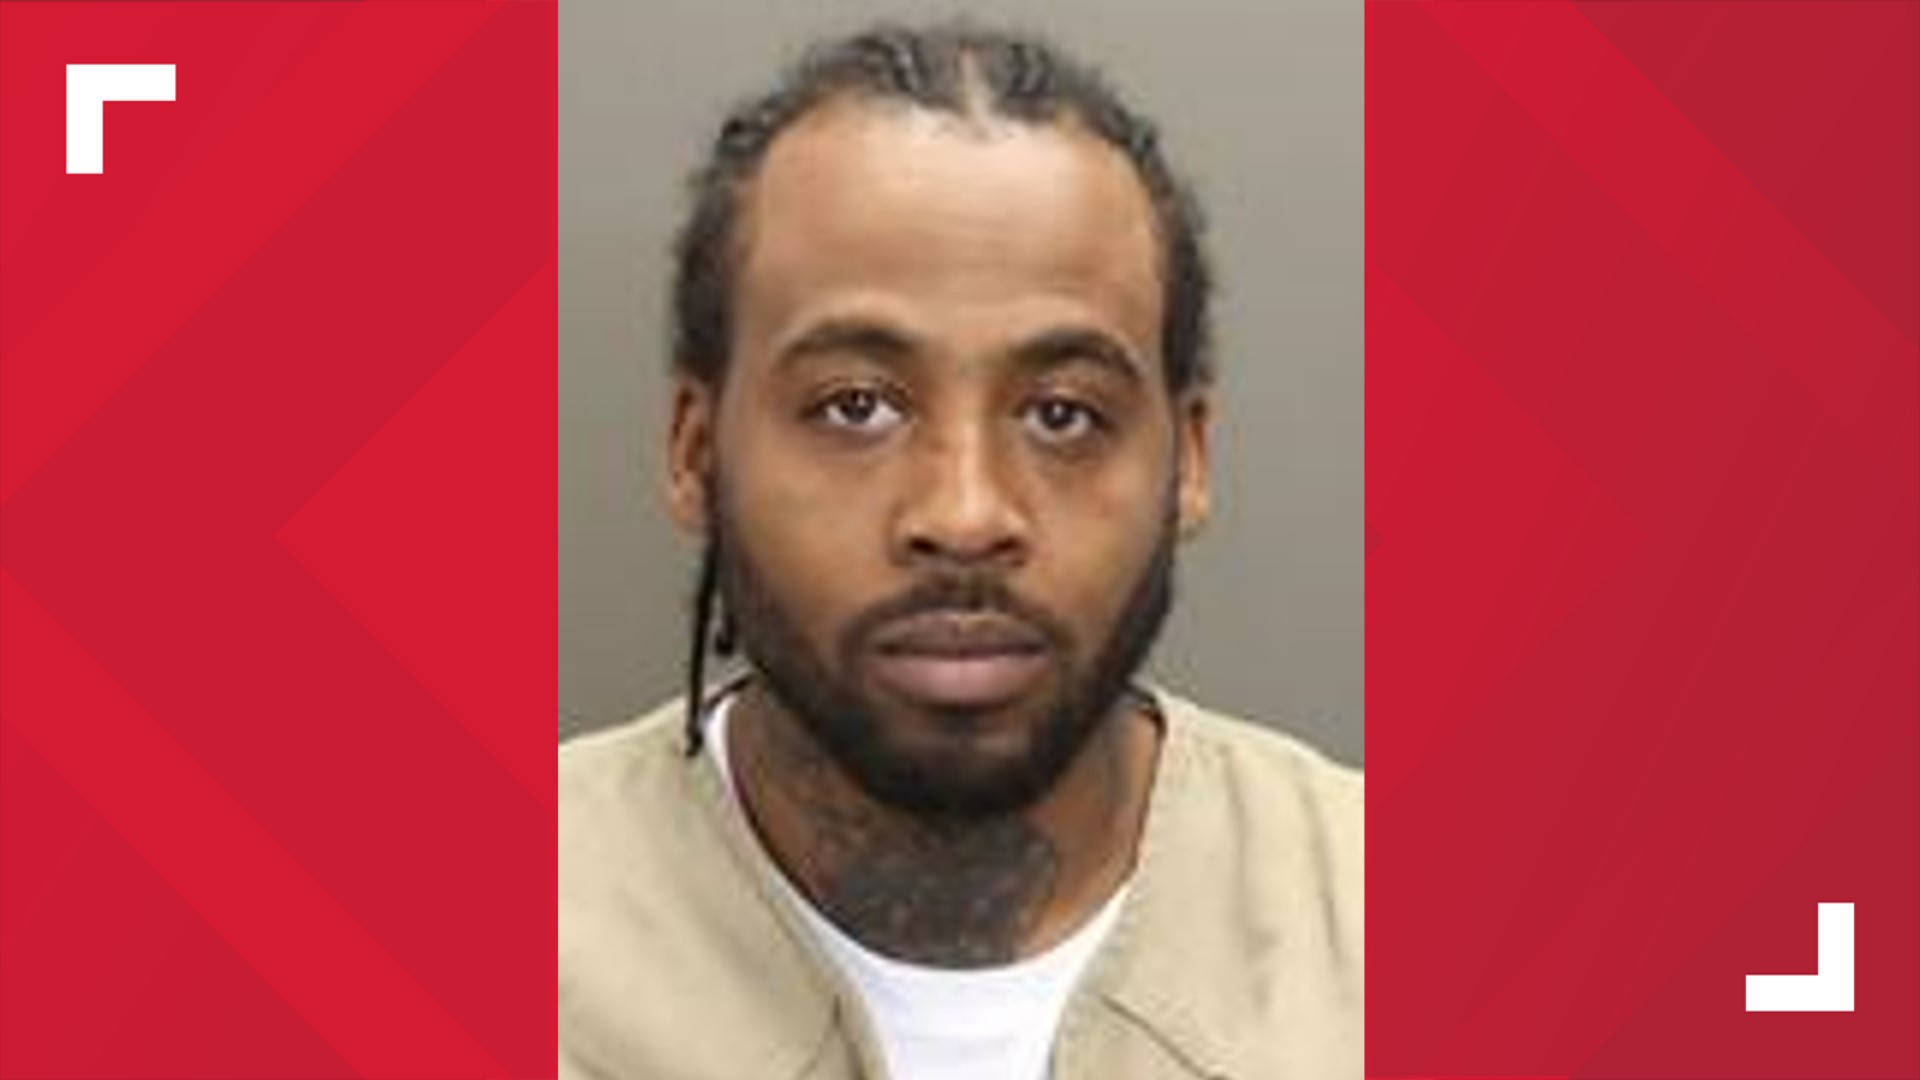 The Columbus Division of Police said 34-year-old Darius Edwards turned himself in Tuesday night.